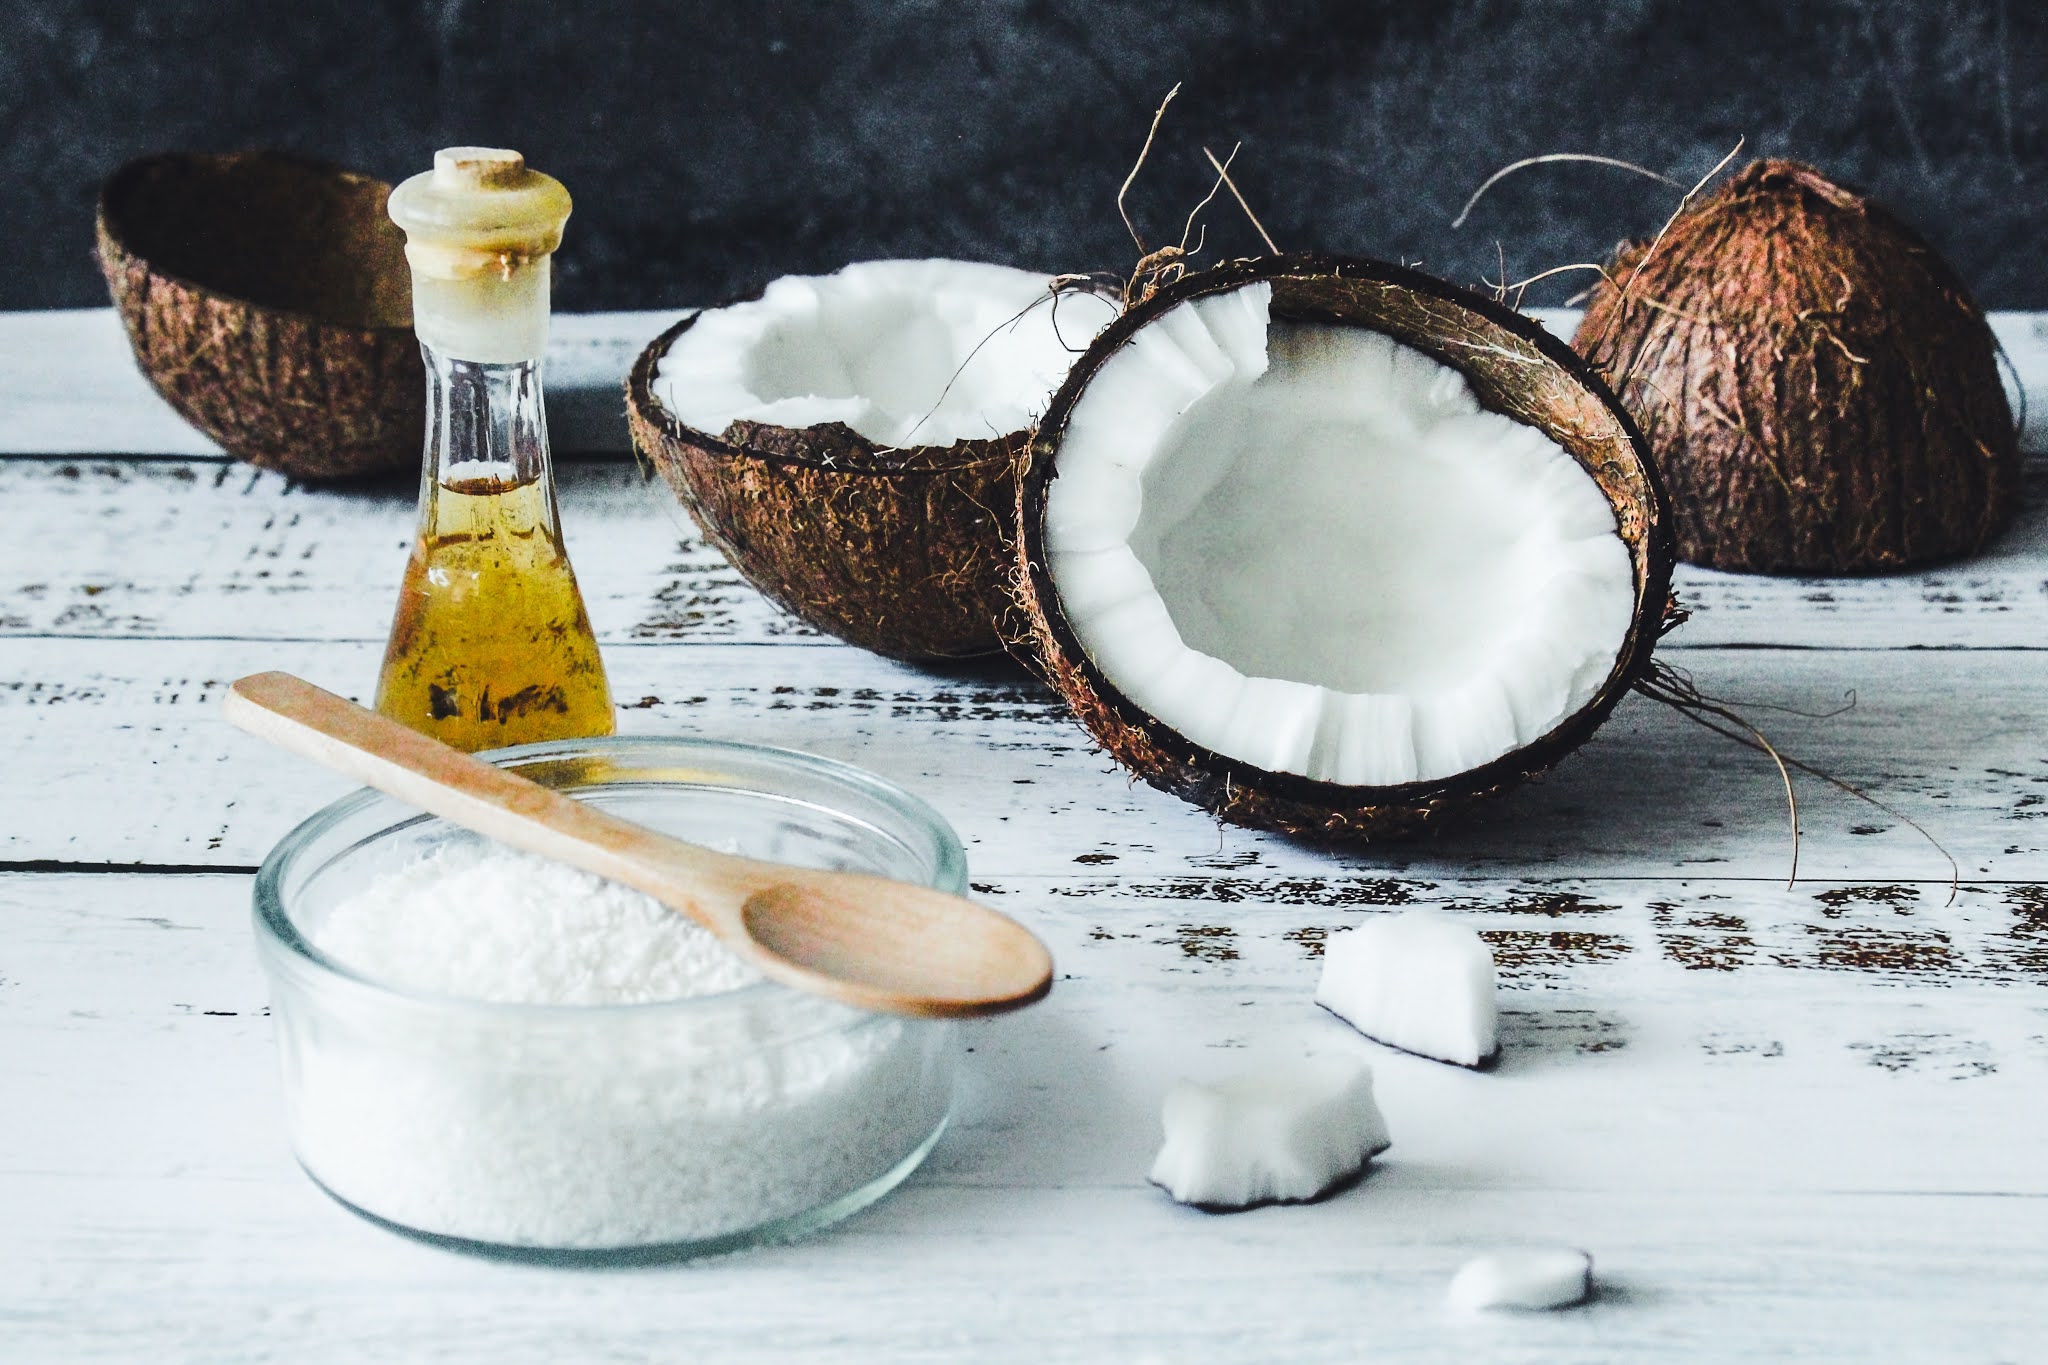 7 Reasons Why You Should Be Using Coconut Oil